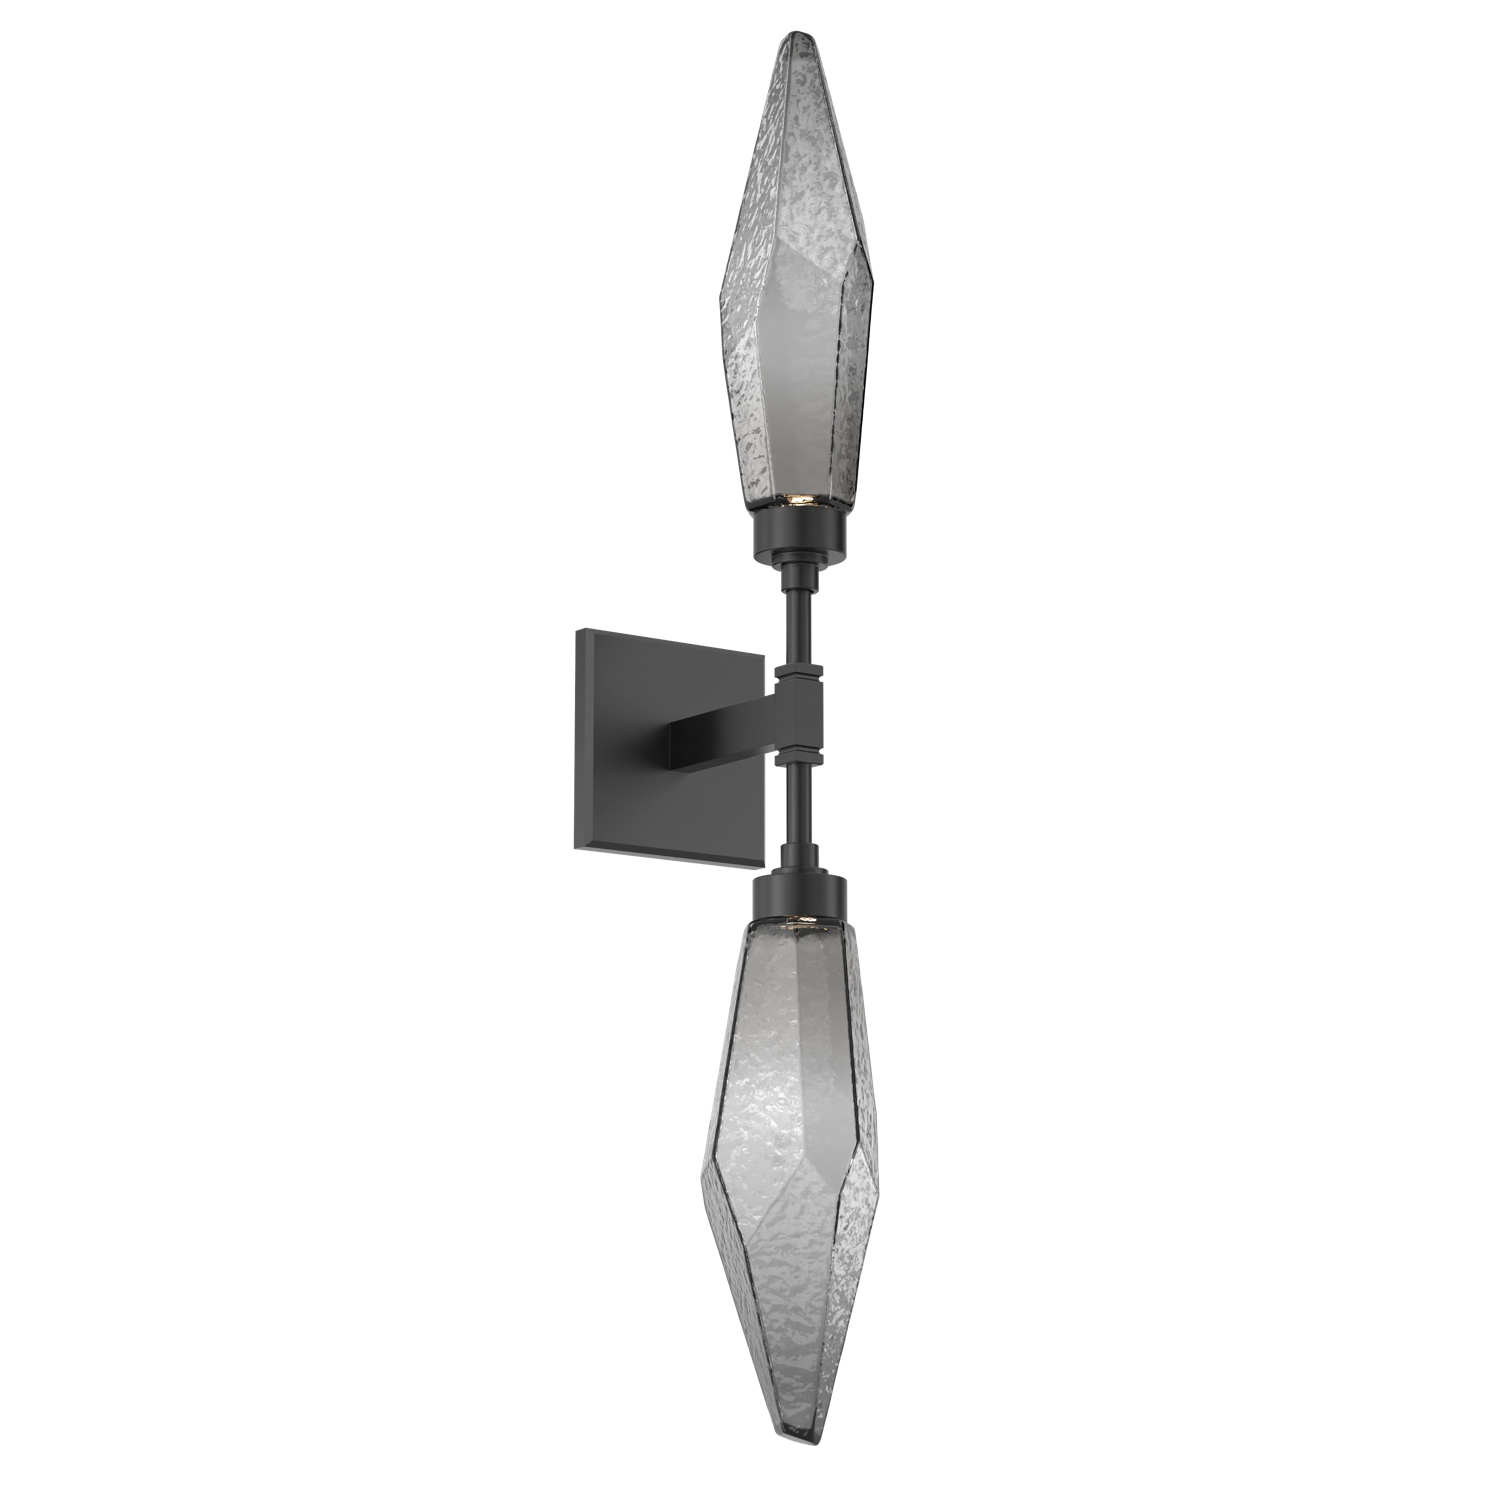 IDB0050-02-MB-CS-Hammerton-Studio-Rock-Crystal-wall-sconce-with-matte-black-finish-and-chilled-smoke-glass-shades-and-LED-lamping